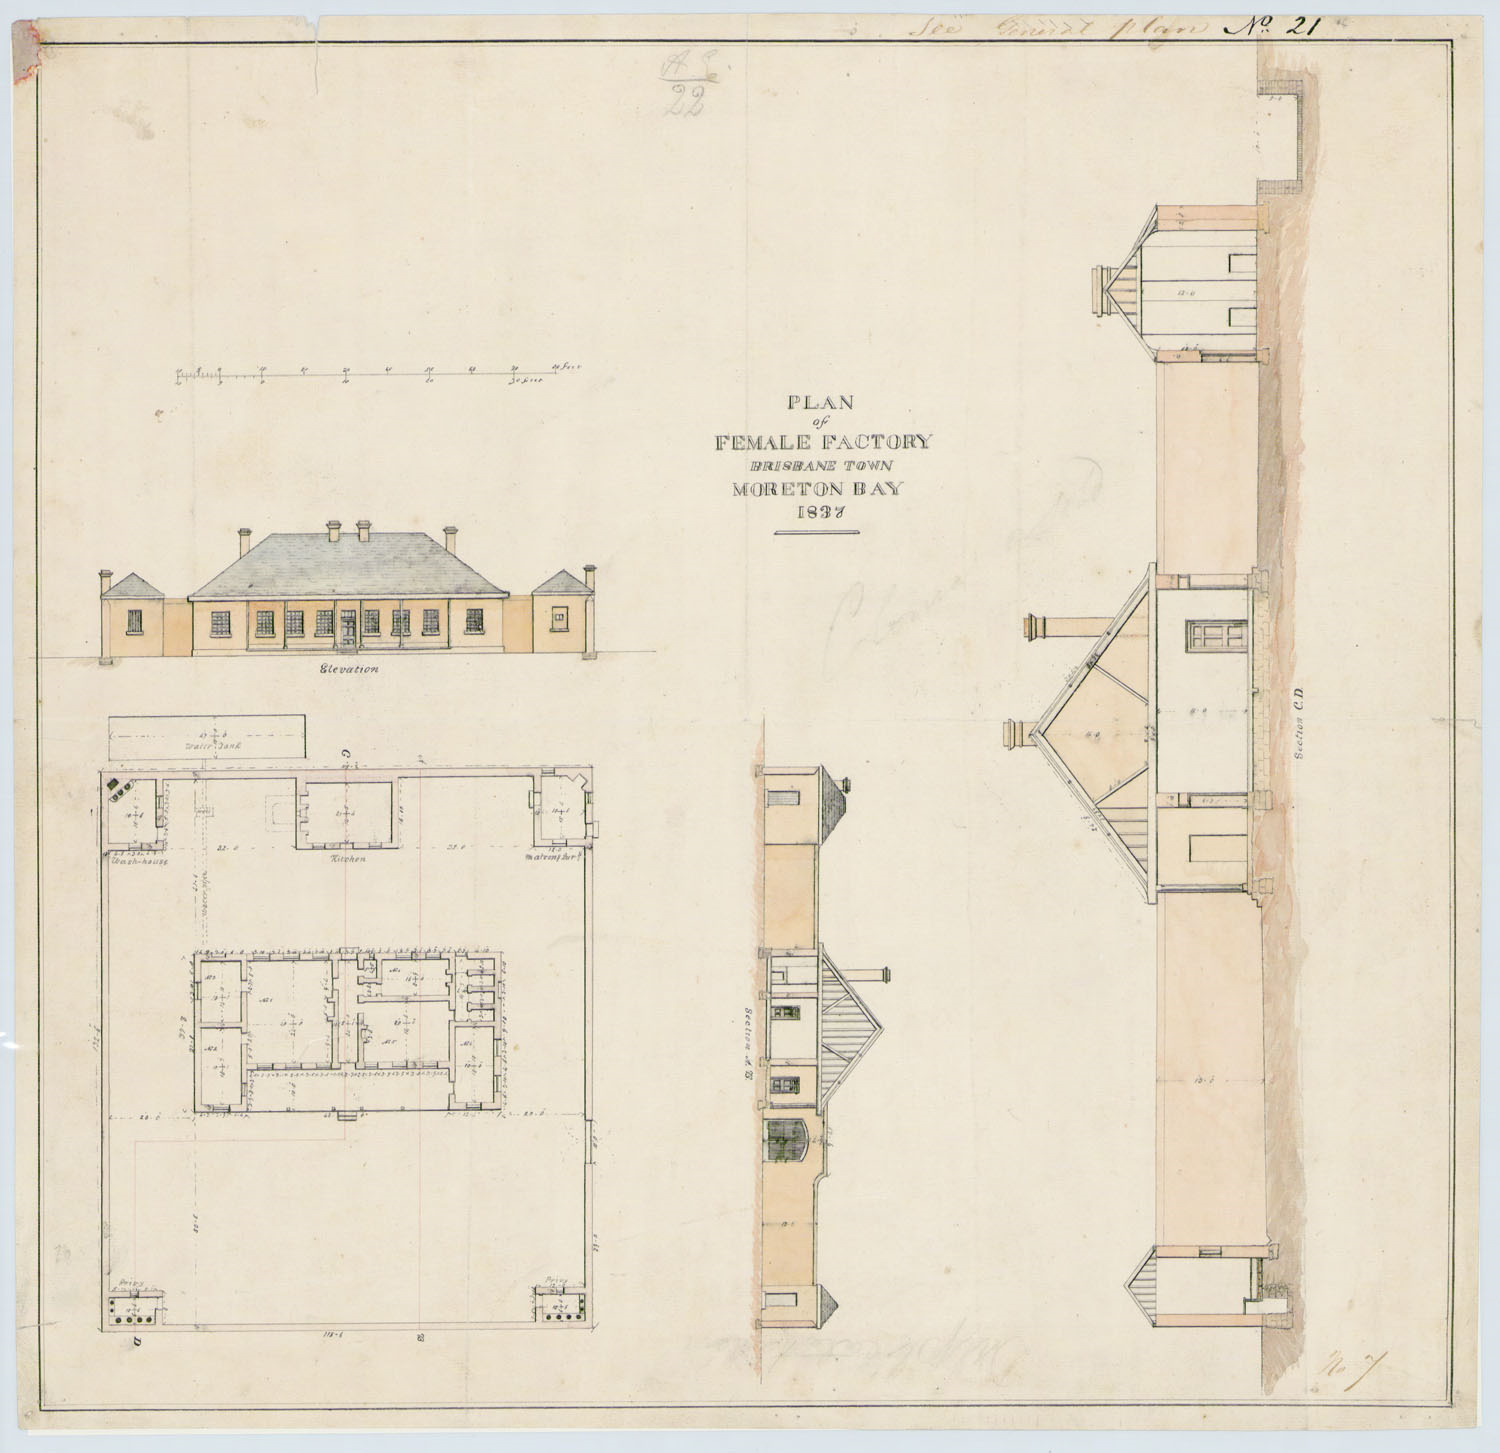 Plan of the Female Factory, Brisbane Town, Moreton Bay, 1837. Source: Queensland State Archives, Item ID ITM659628.